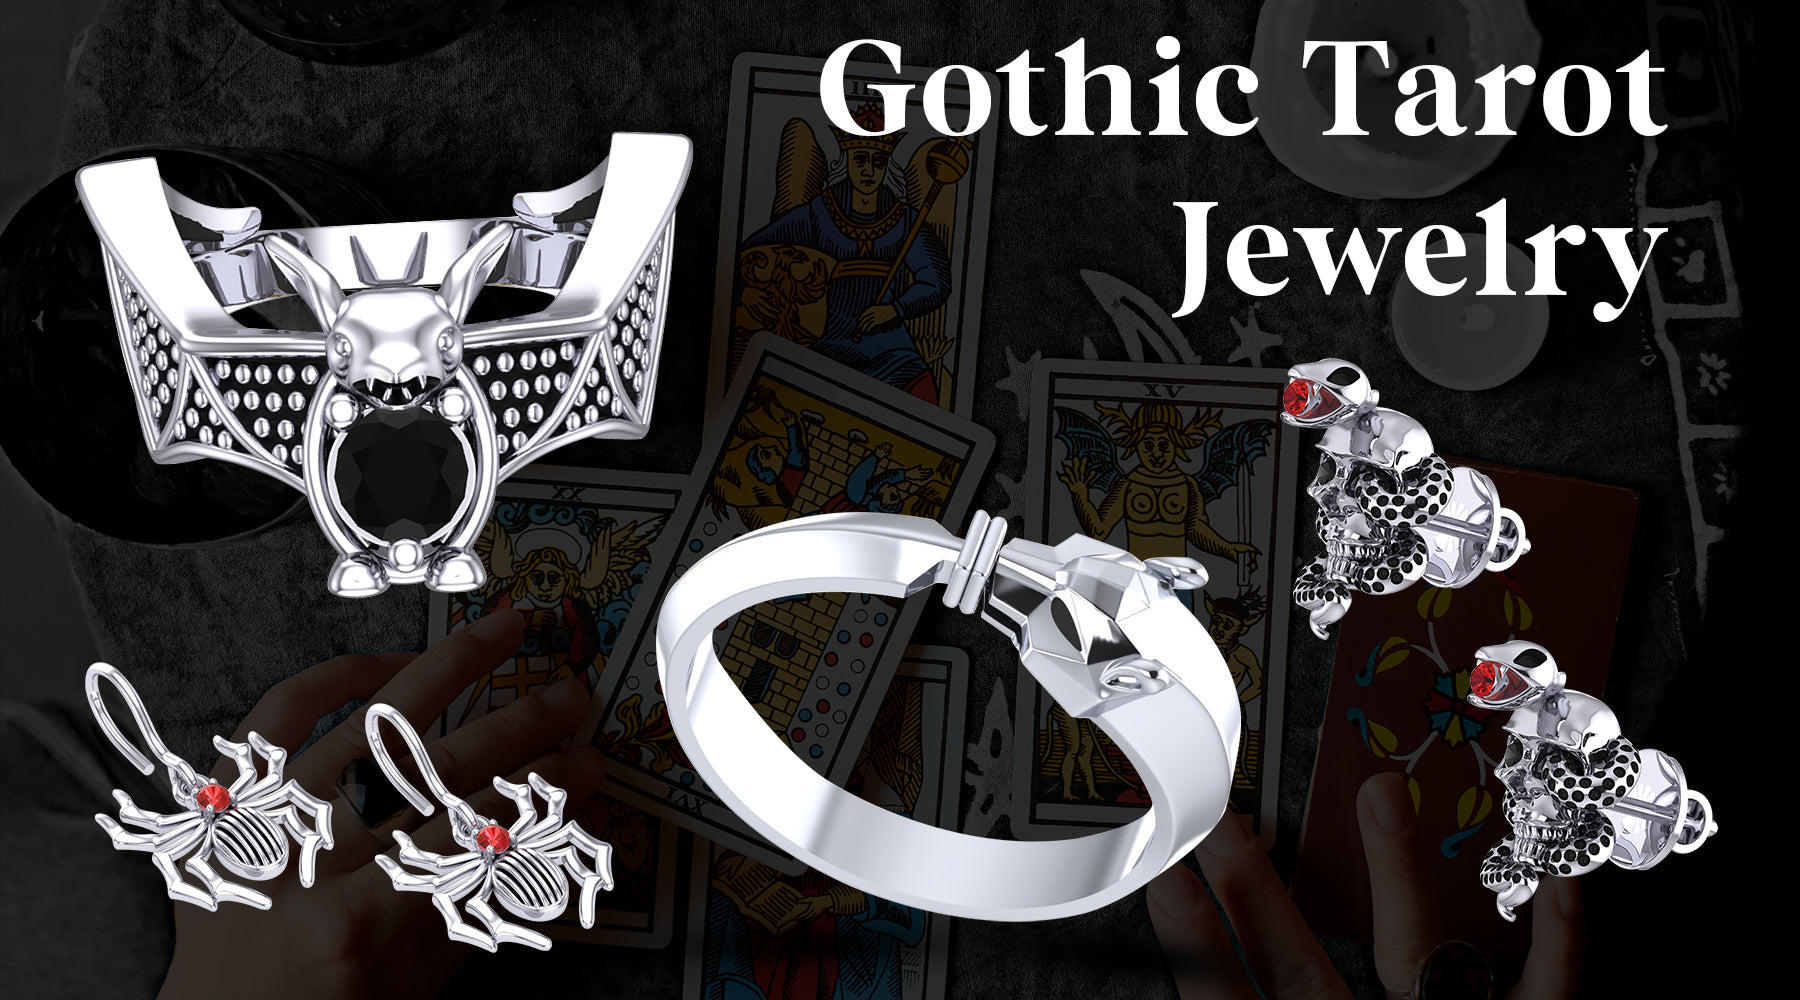 Gothic Tarot Jewelry and Its Connection to Tarot Readings